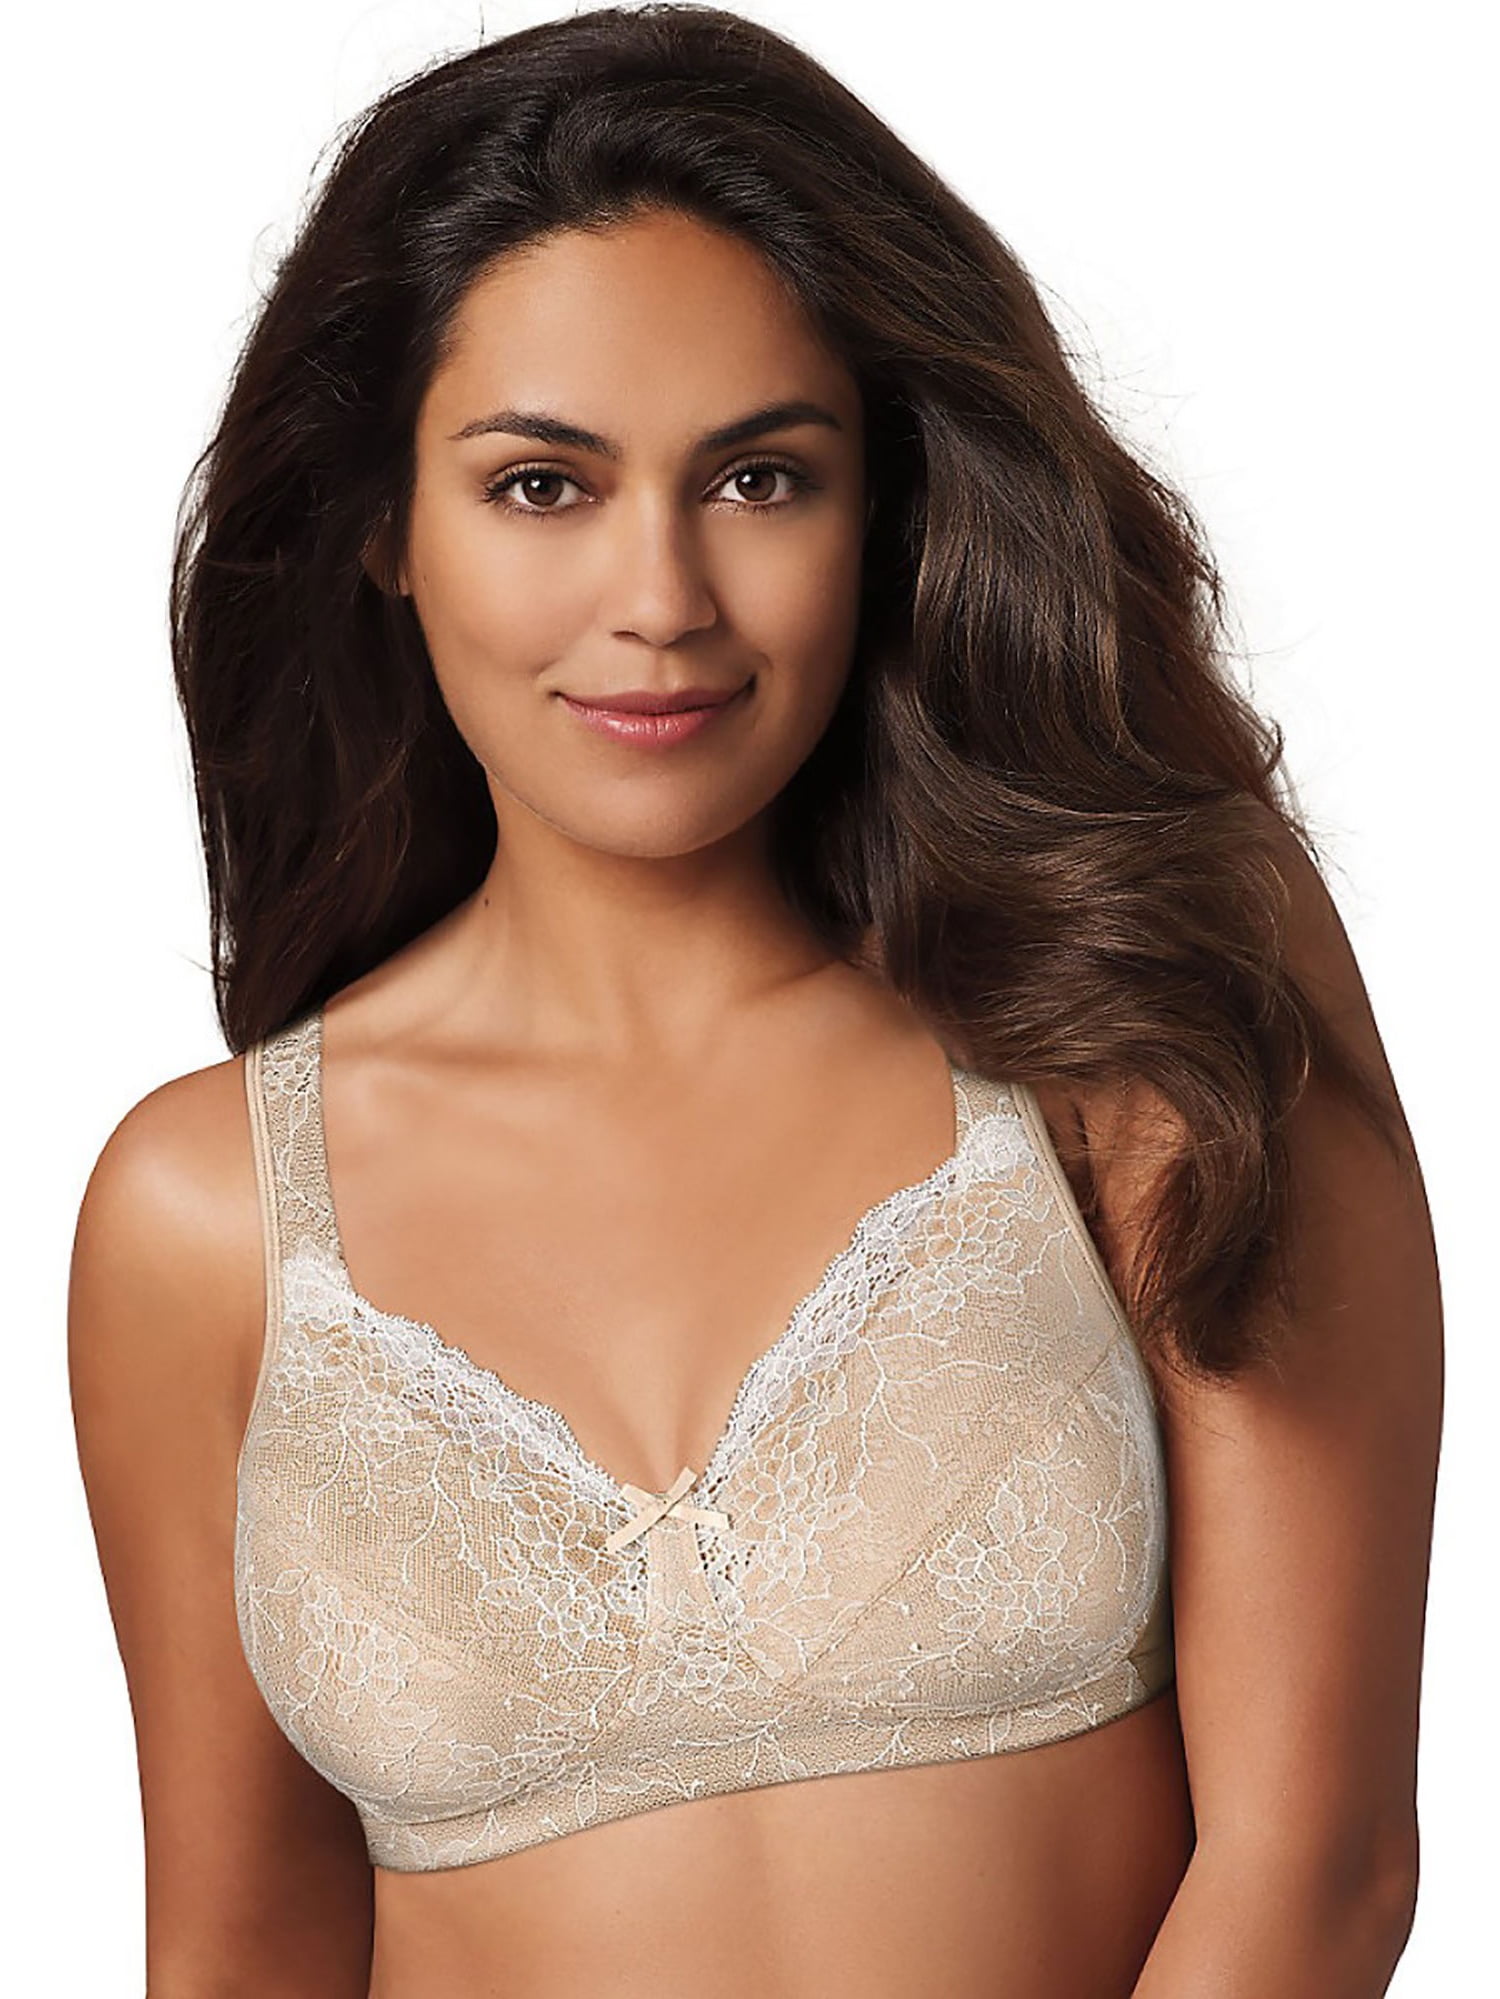 Playtex Wirefree Bra with Inner BoostU Panels, Style E515 